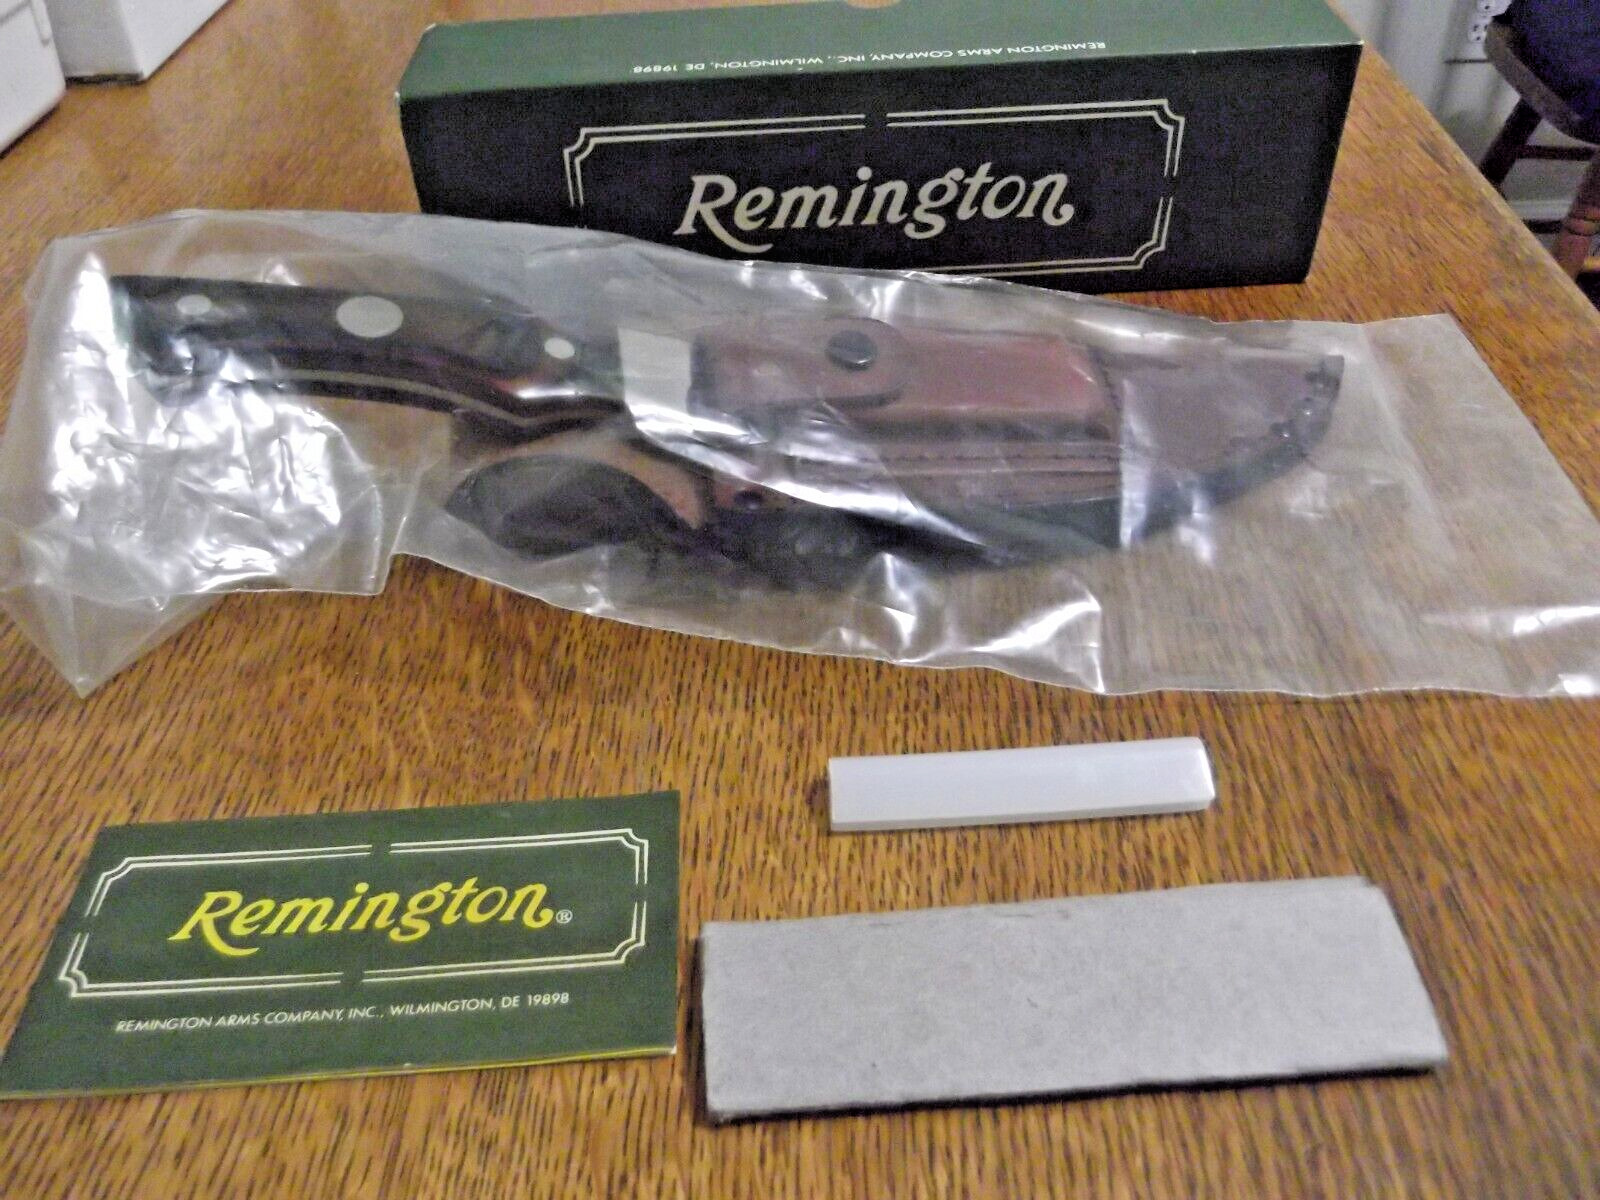 REMINGTON R 6 Skinner Fixed Blade Knife 1994 CAMILLUS NEW in Box 1 of 1000 USA